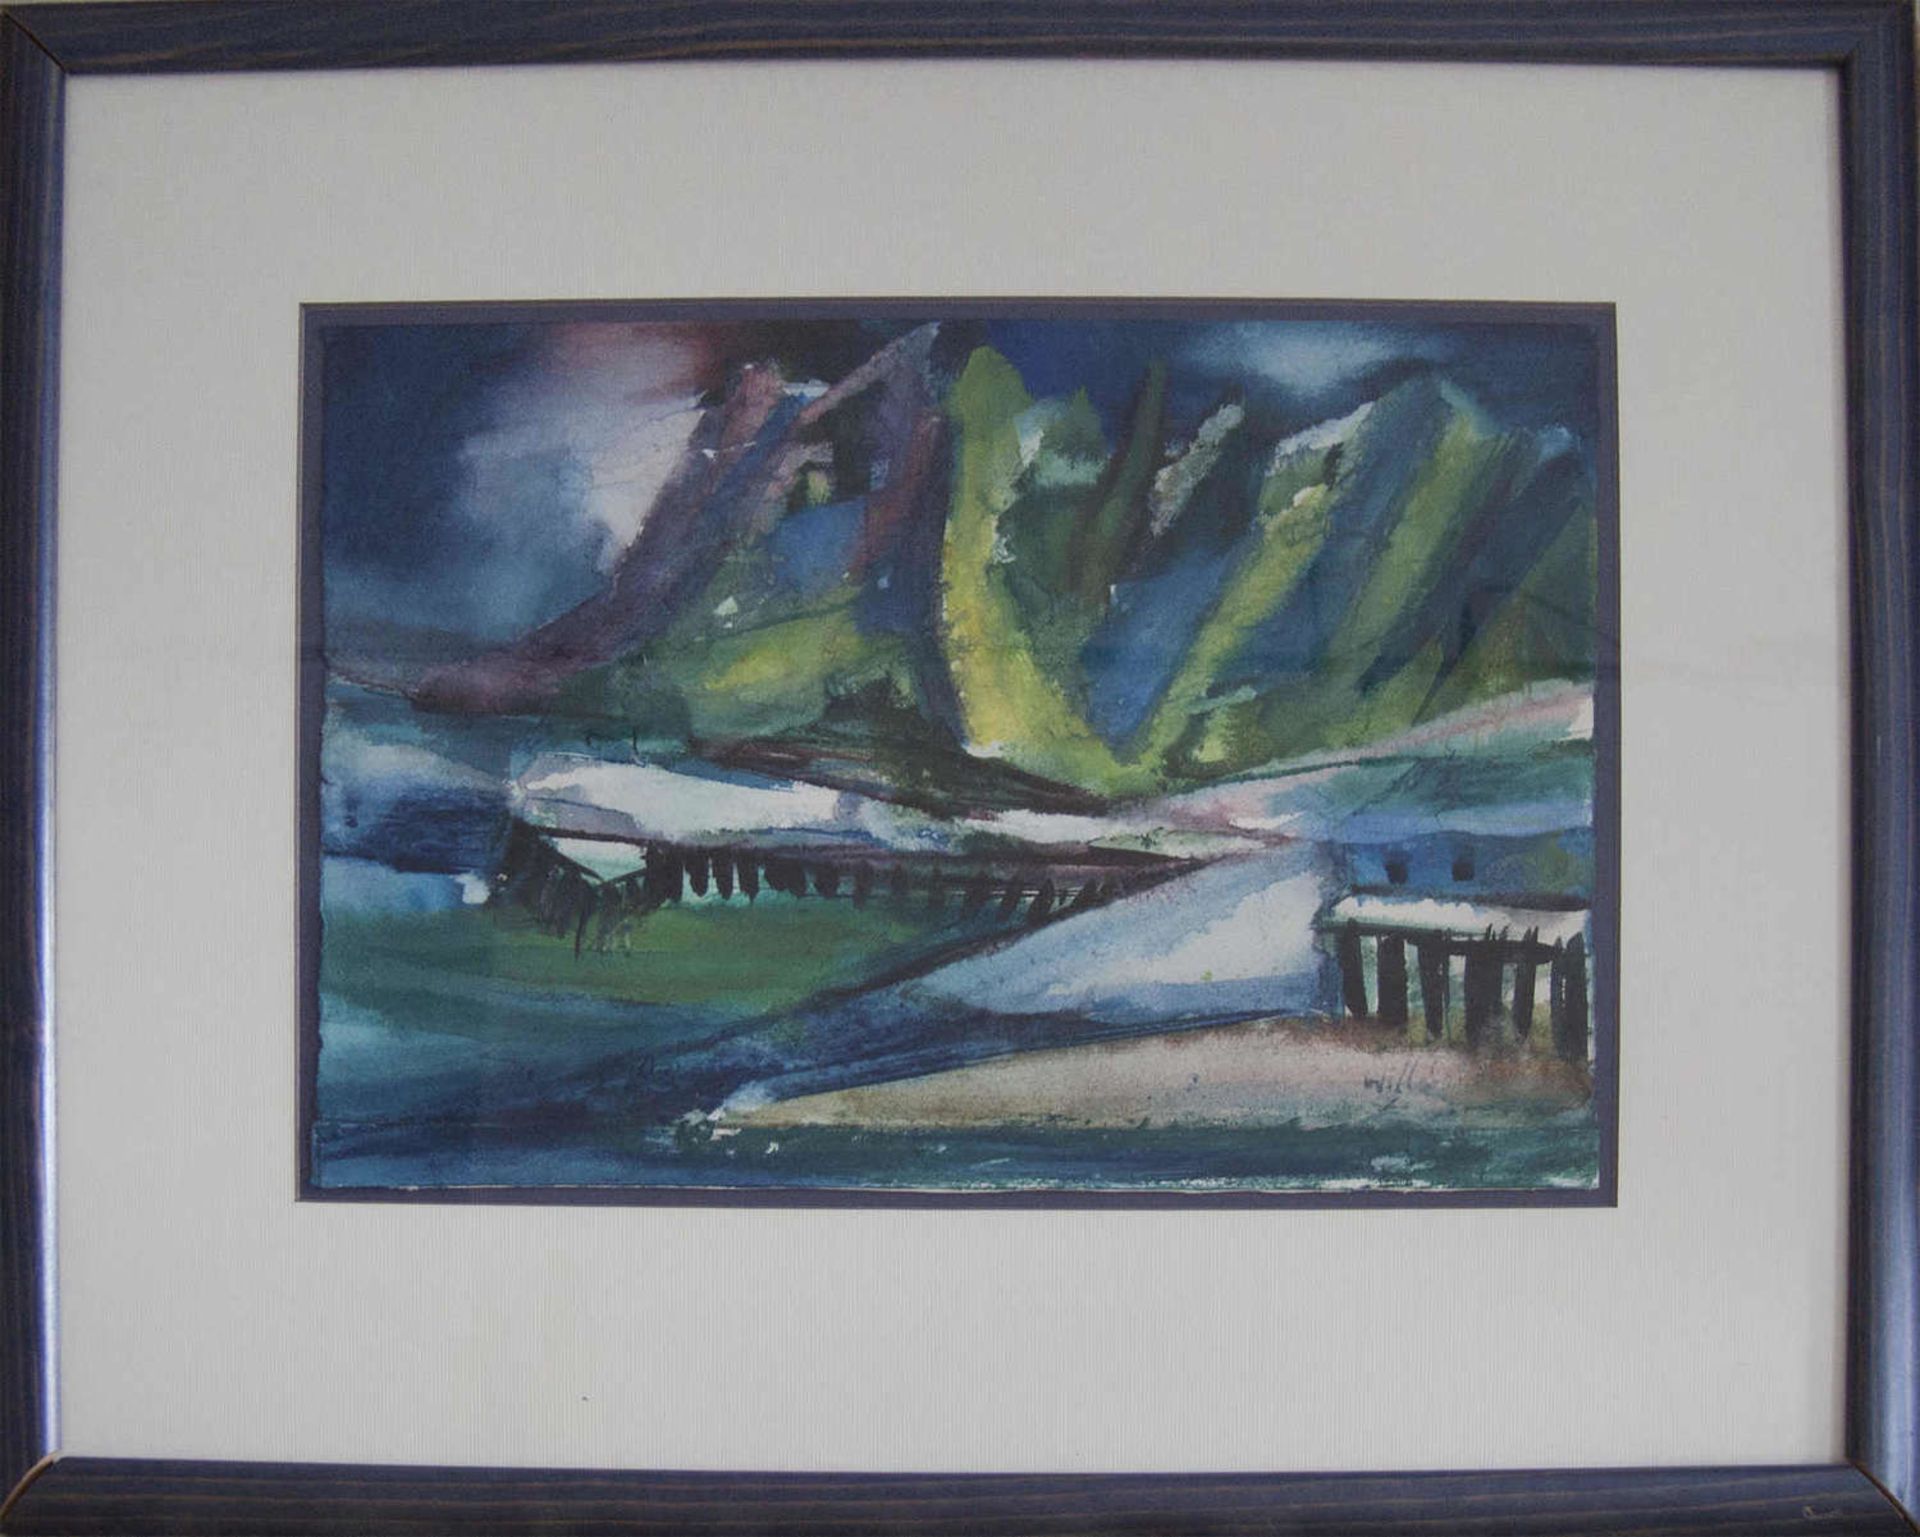 From Palatine Private Collection!"Lofoten", drawing, watercolor, lower right Signature Will Soh